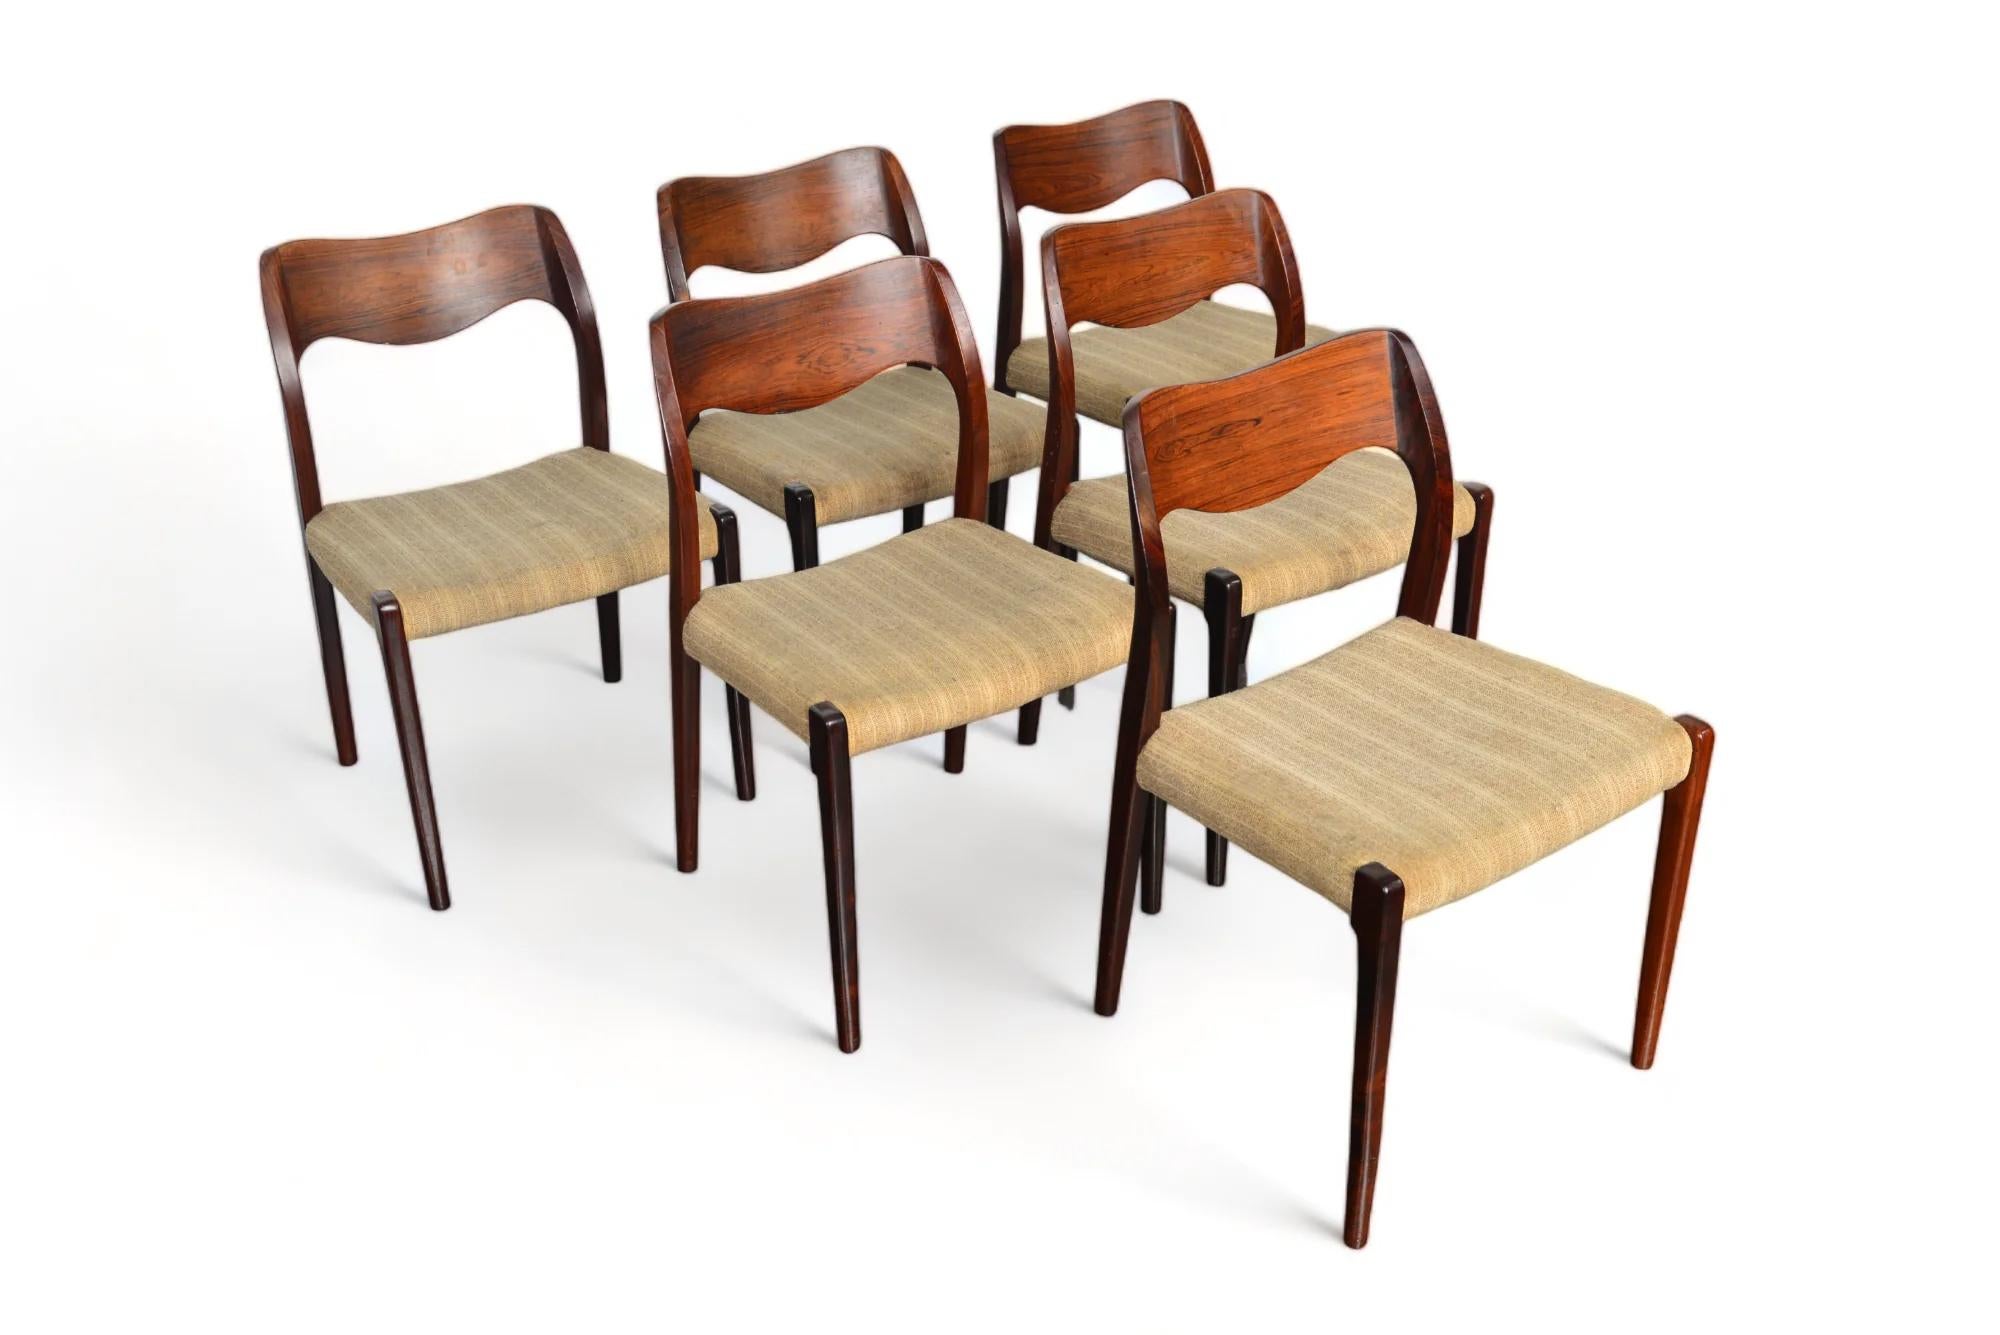 Mid-Century Modern Set Of Six J.l. Møller Model 71 Dining Chairs In Brazilian Rosewood #1 For Sale